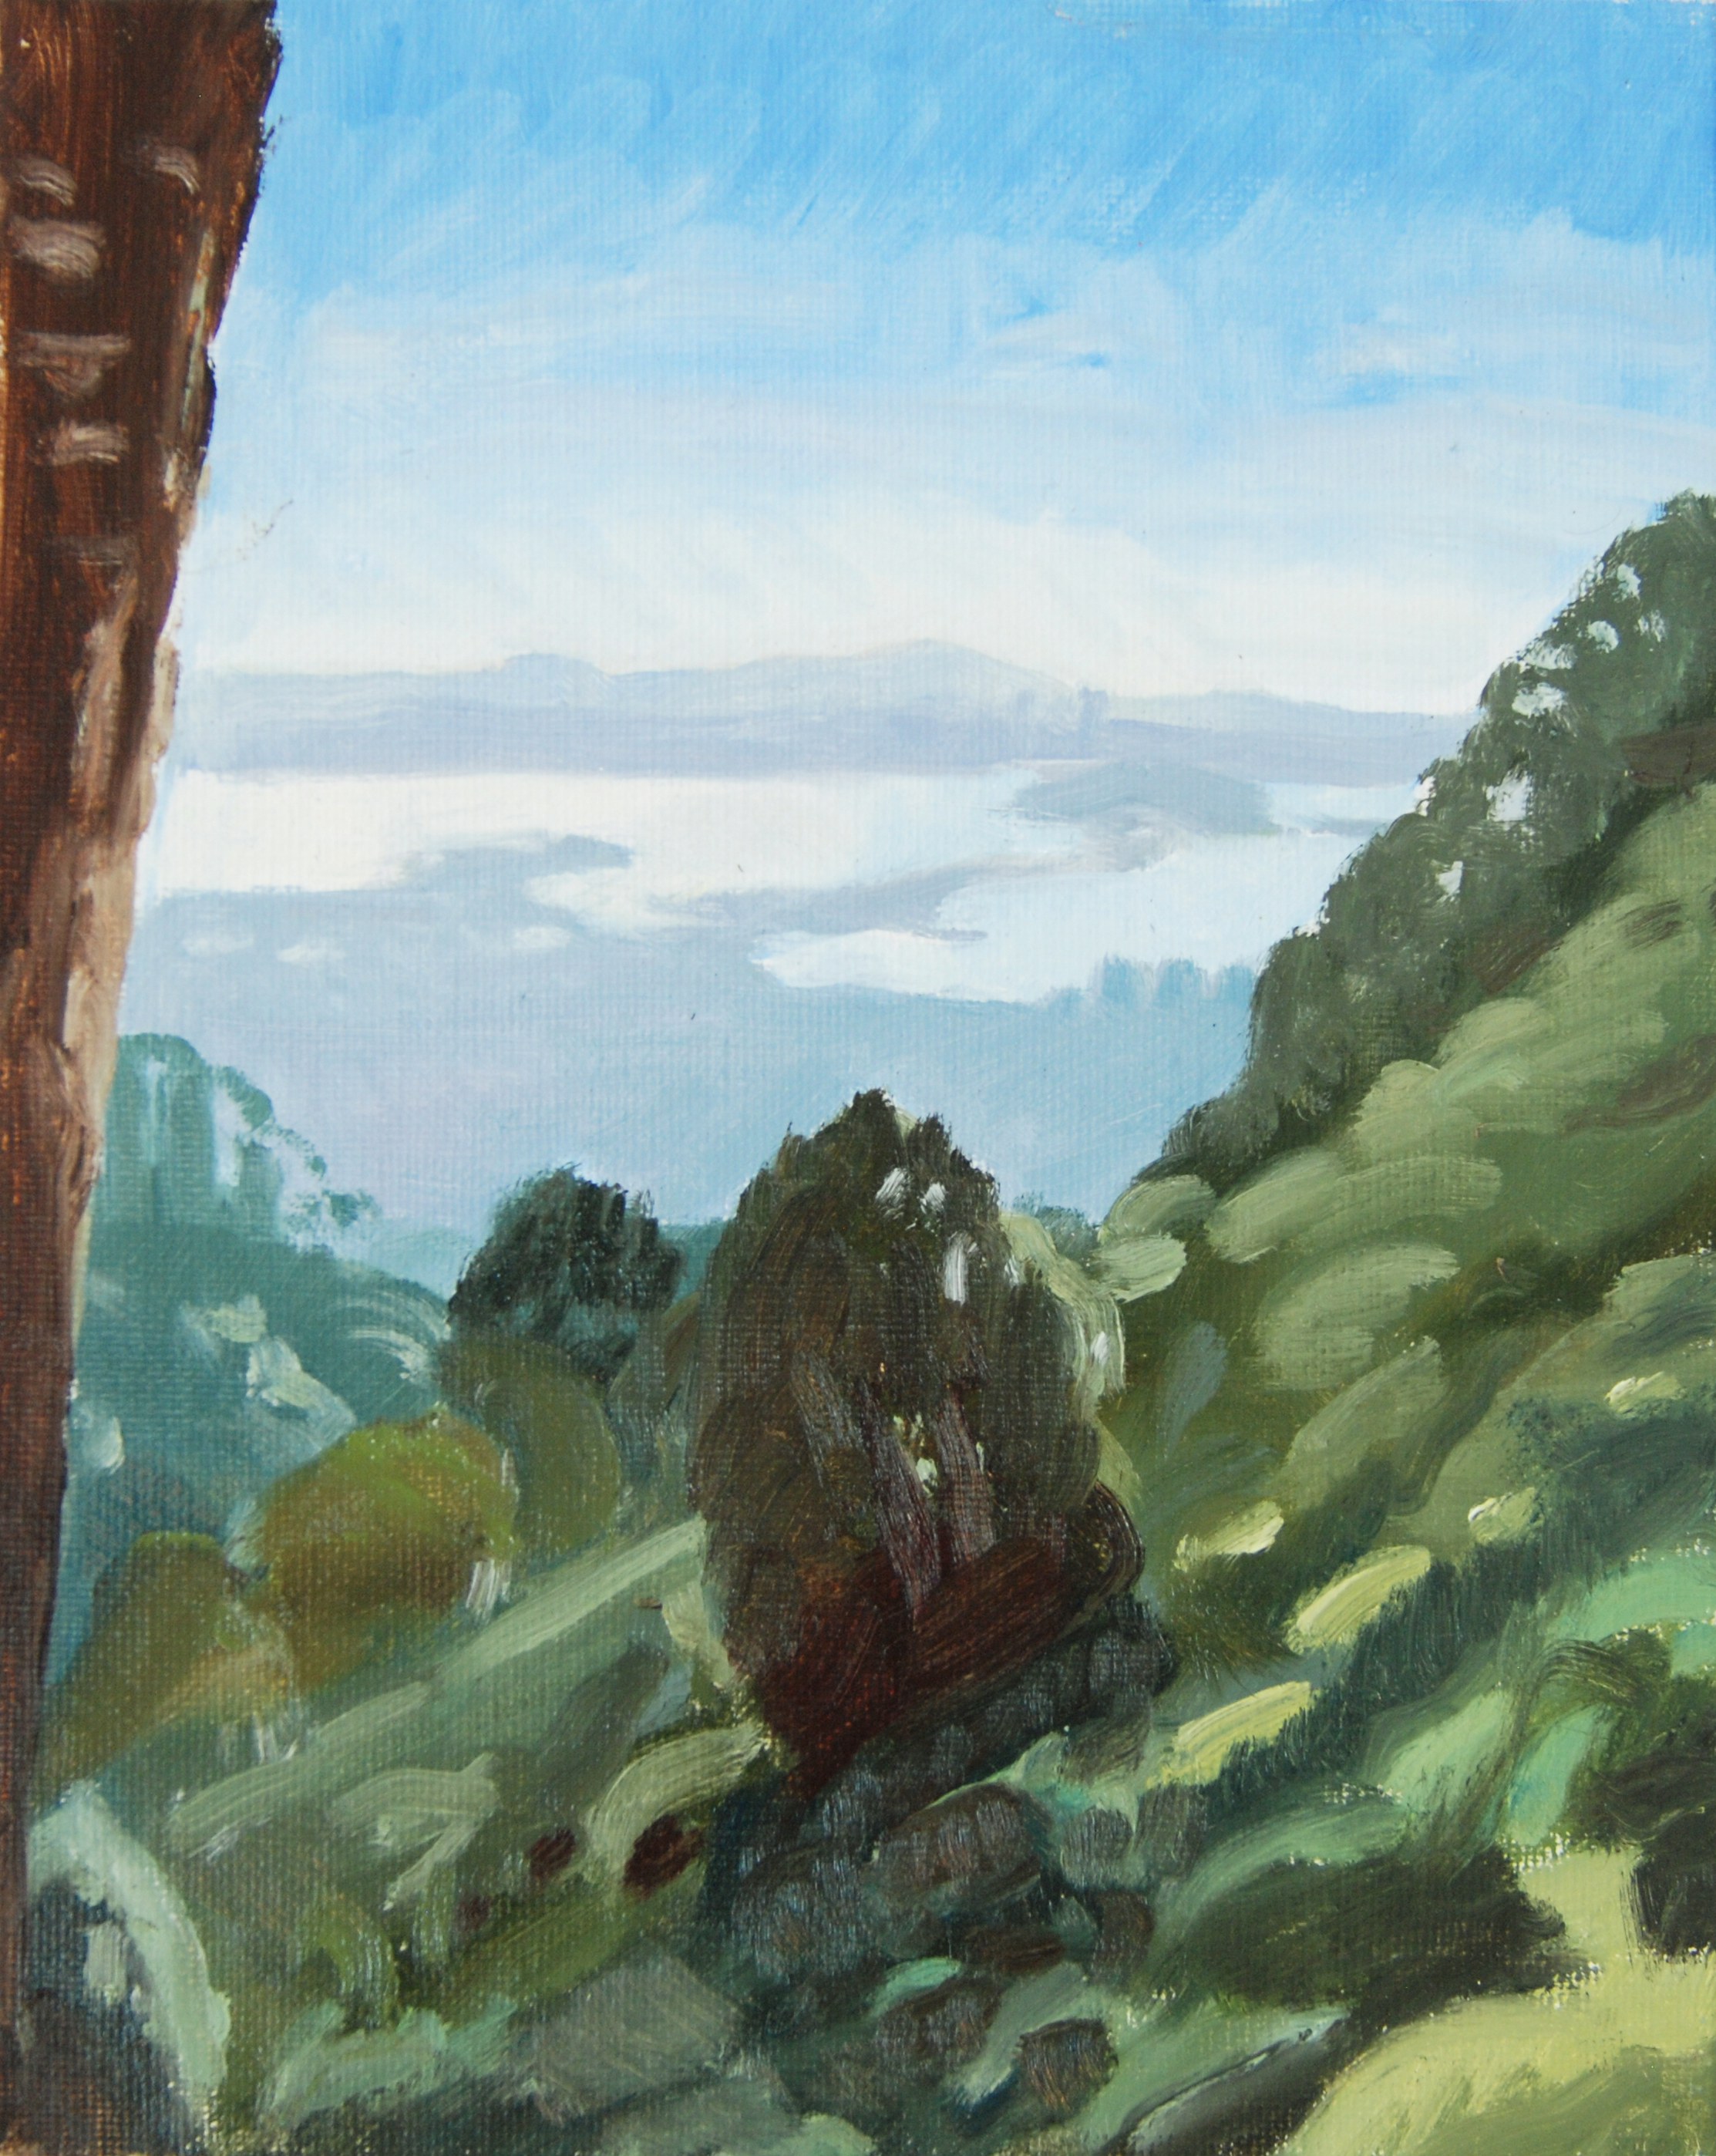   Grizzly Peak Boulevard, Berkeley , 10 x 8 in.  Oil on canvas. Available for purchase. (2015) 